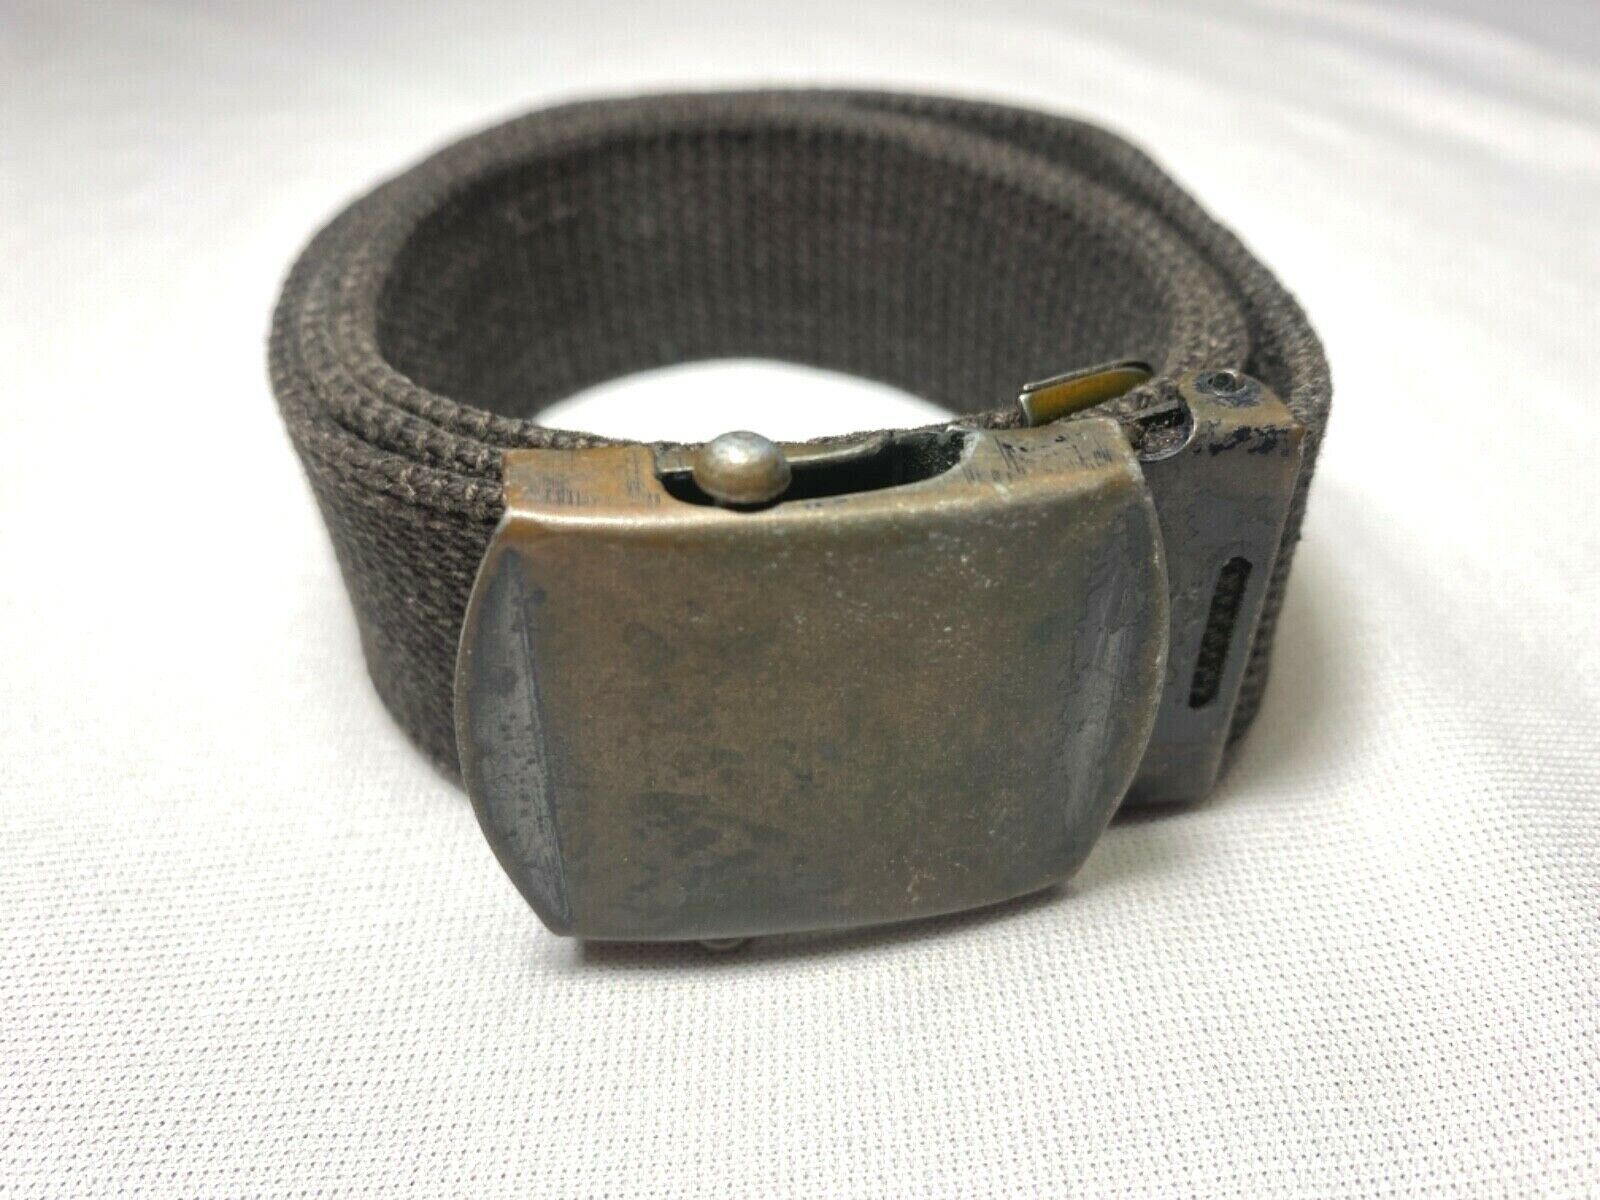 US Army Officer Waist Trousers Belt WW2 Named Black Painted Buckle SpecOps?